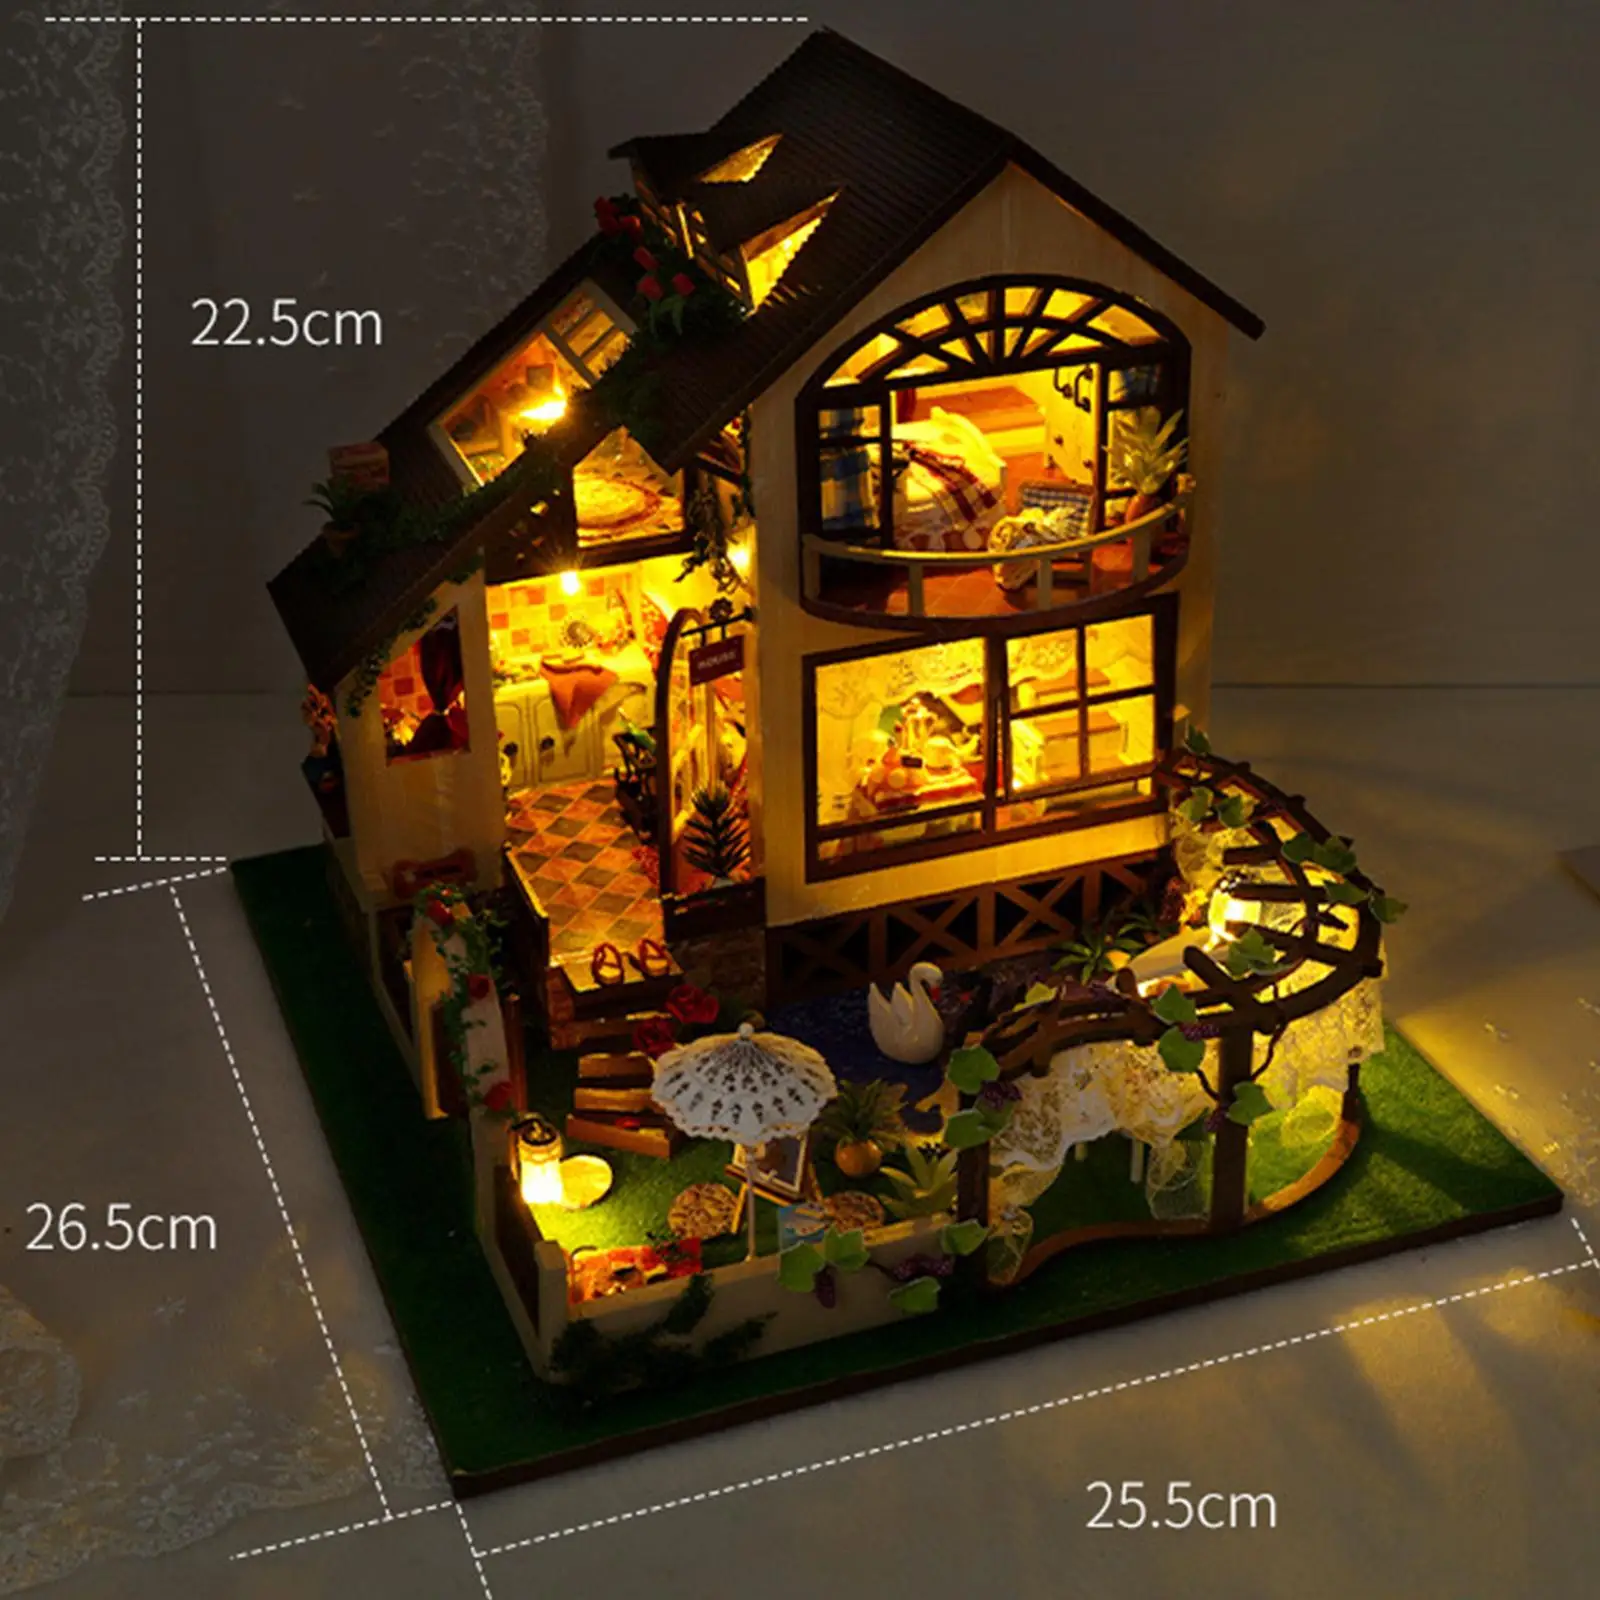 Miniature Dolls House Kits Decorations DIY Crafts with LED Lights 3D Puzzles with Accessories for Kids Birthday Gift Friends